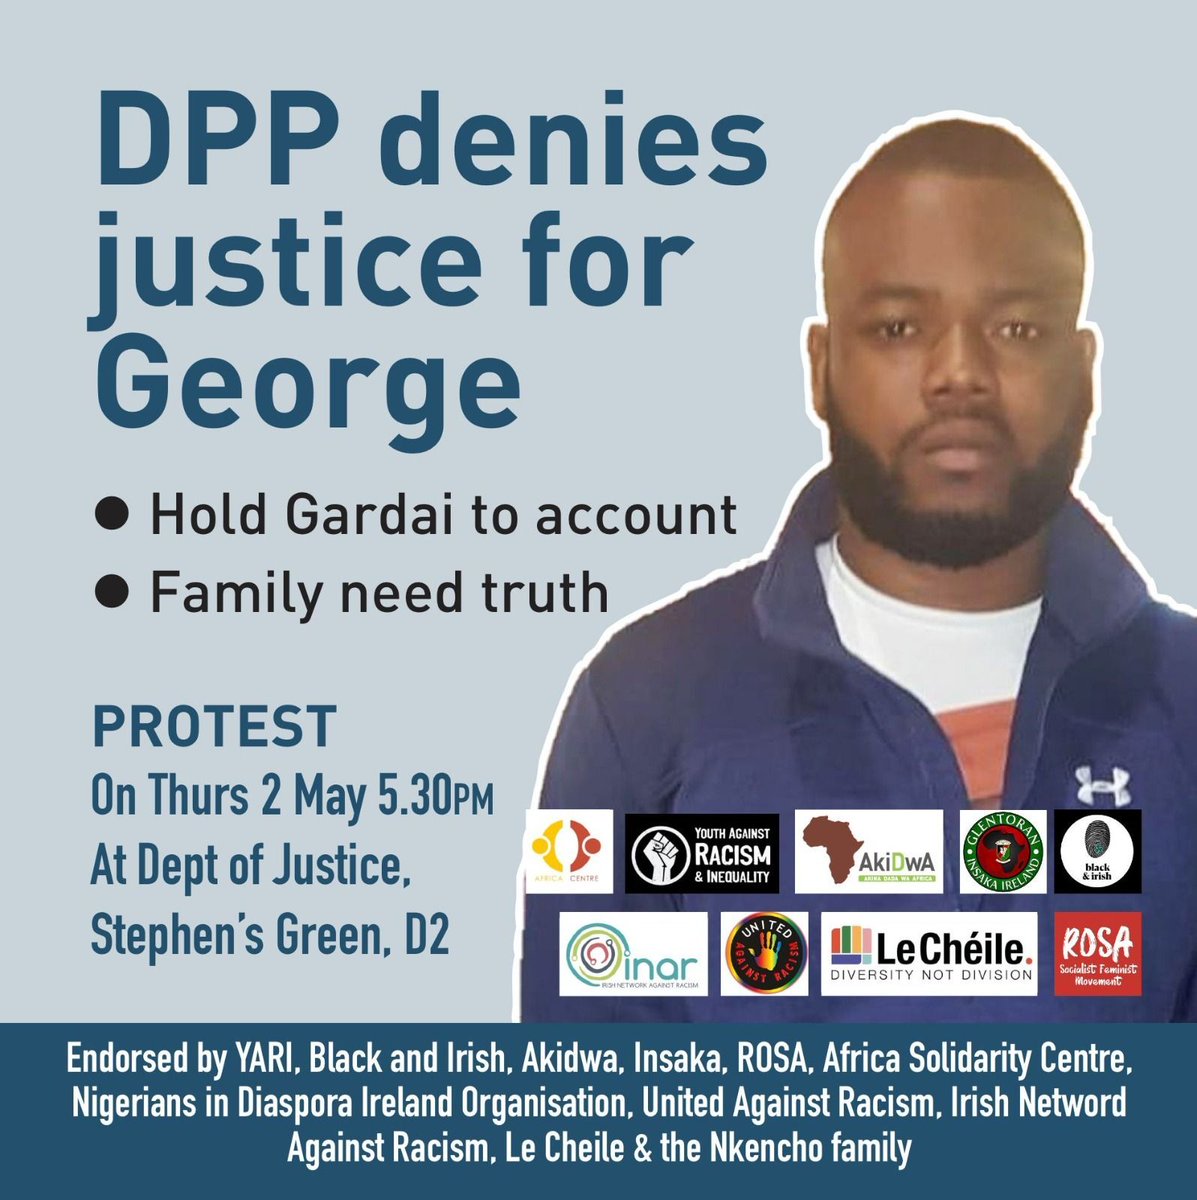 Tomorrow, join us as we support the family of George Nkencho to find answers surrounding George's death. Location: Dept. of Justice, Stephens Green, D2. Time: 17:30